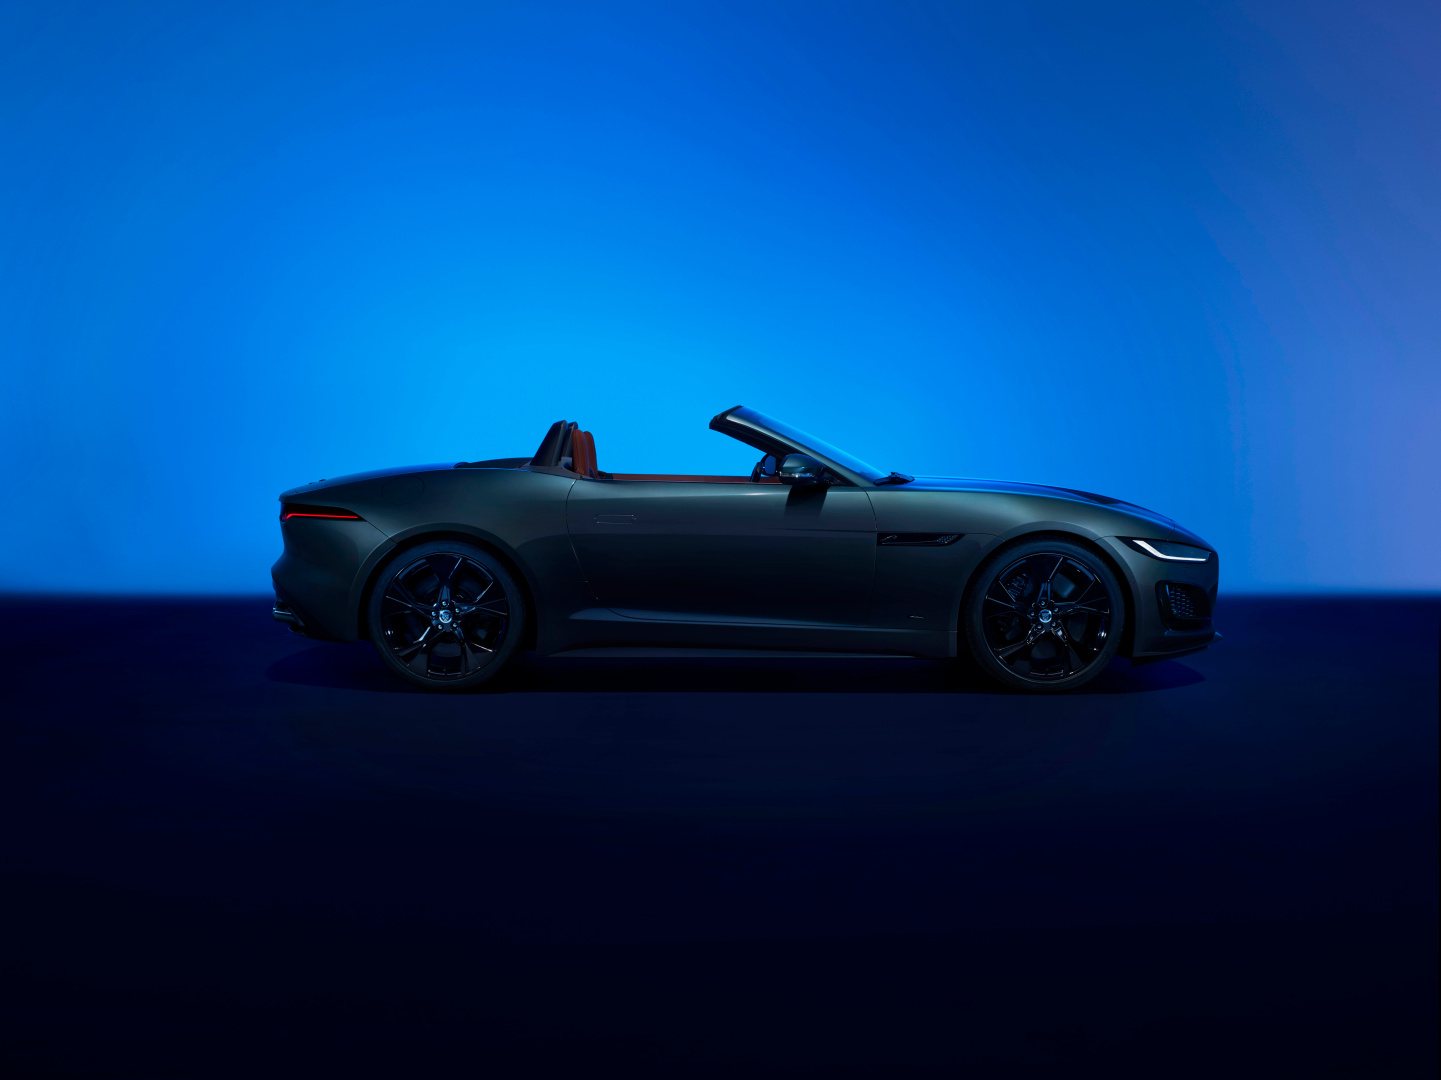 SMALL_002_Jag_F-TYPE_24MY_Convertible_Exterior_Side_025_PR_111022